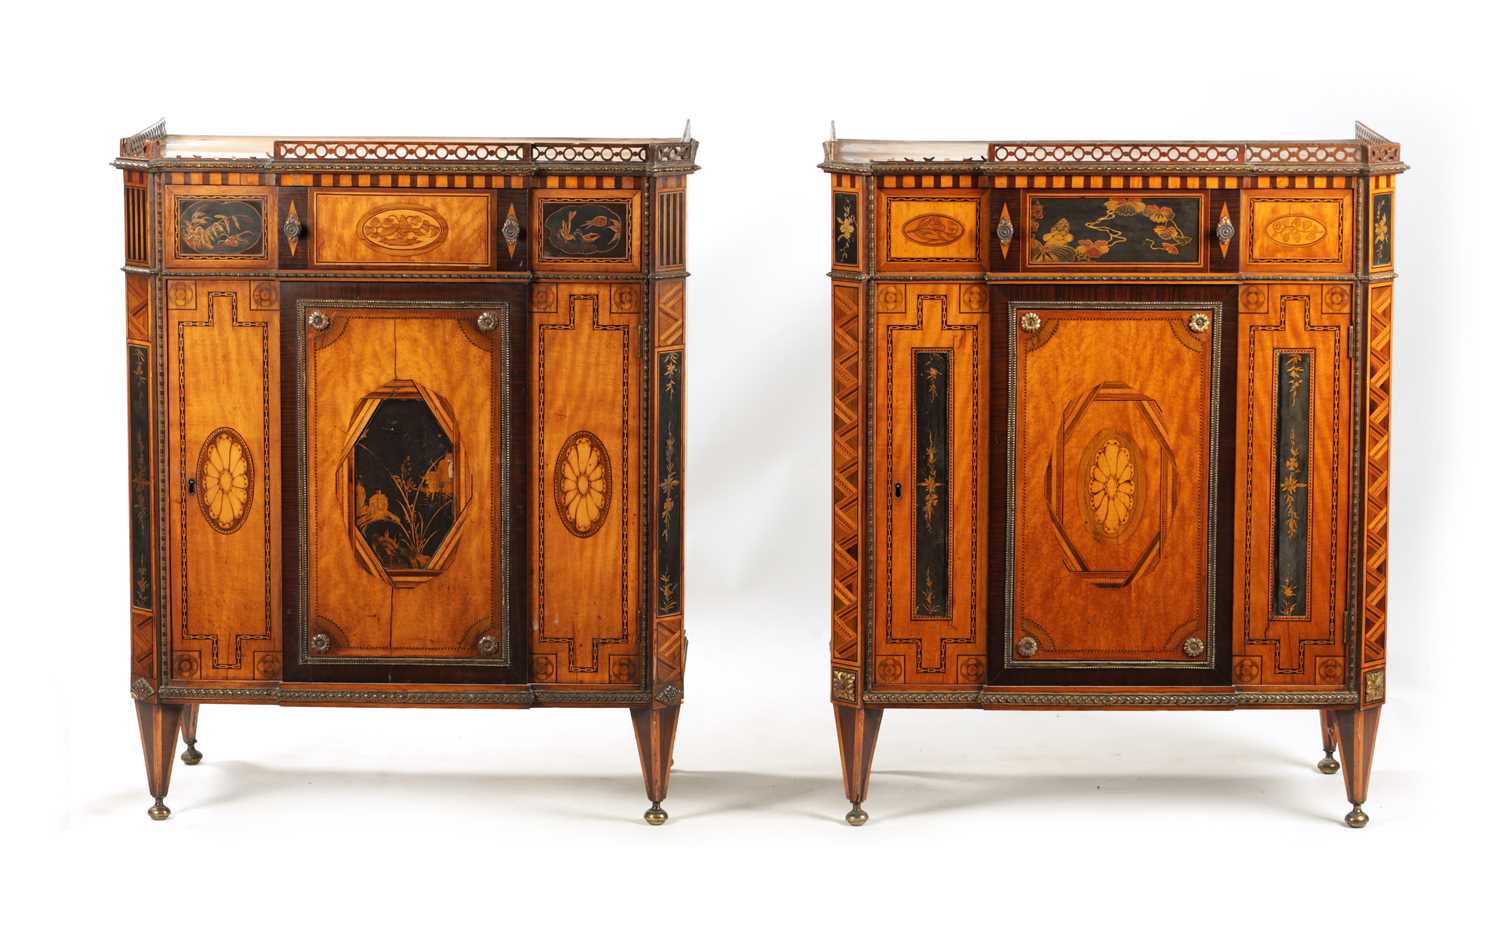 A FINE PAIR OF 18TH CENTURY CONTINENTAL SATINWOOD AND MAHOGANY LACQUERWORK AND INLAID SIDE CABINETS